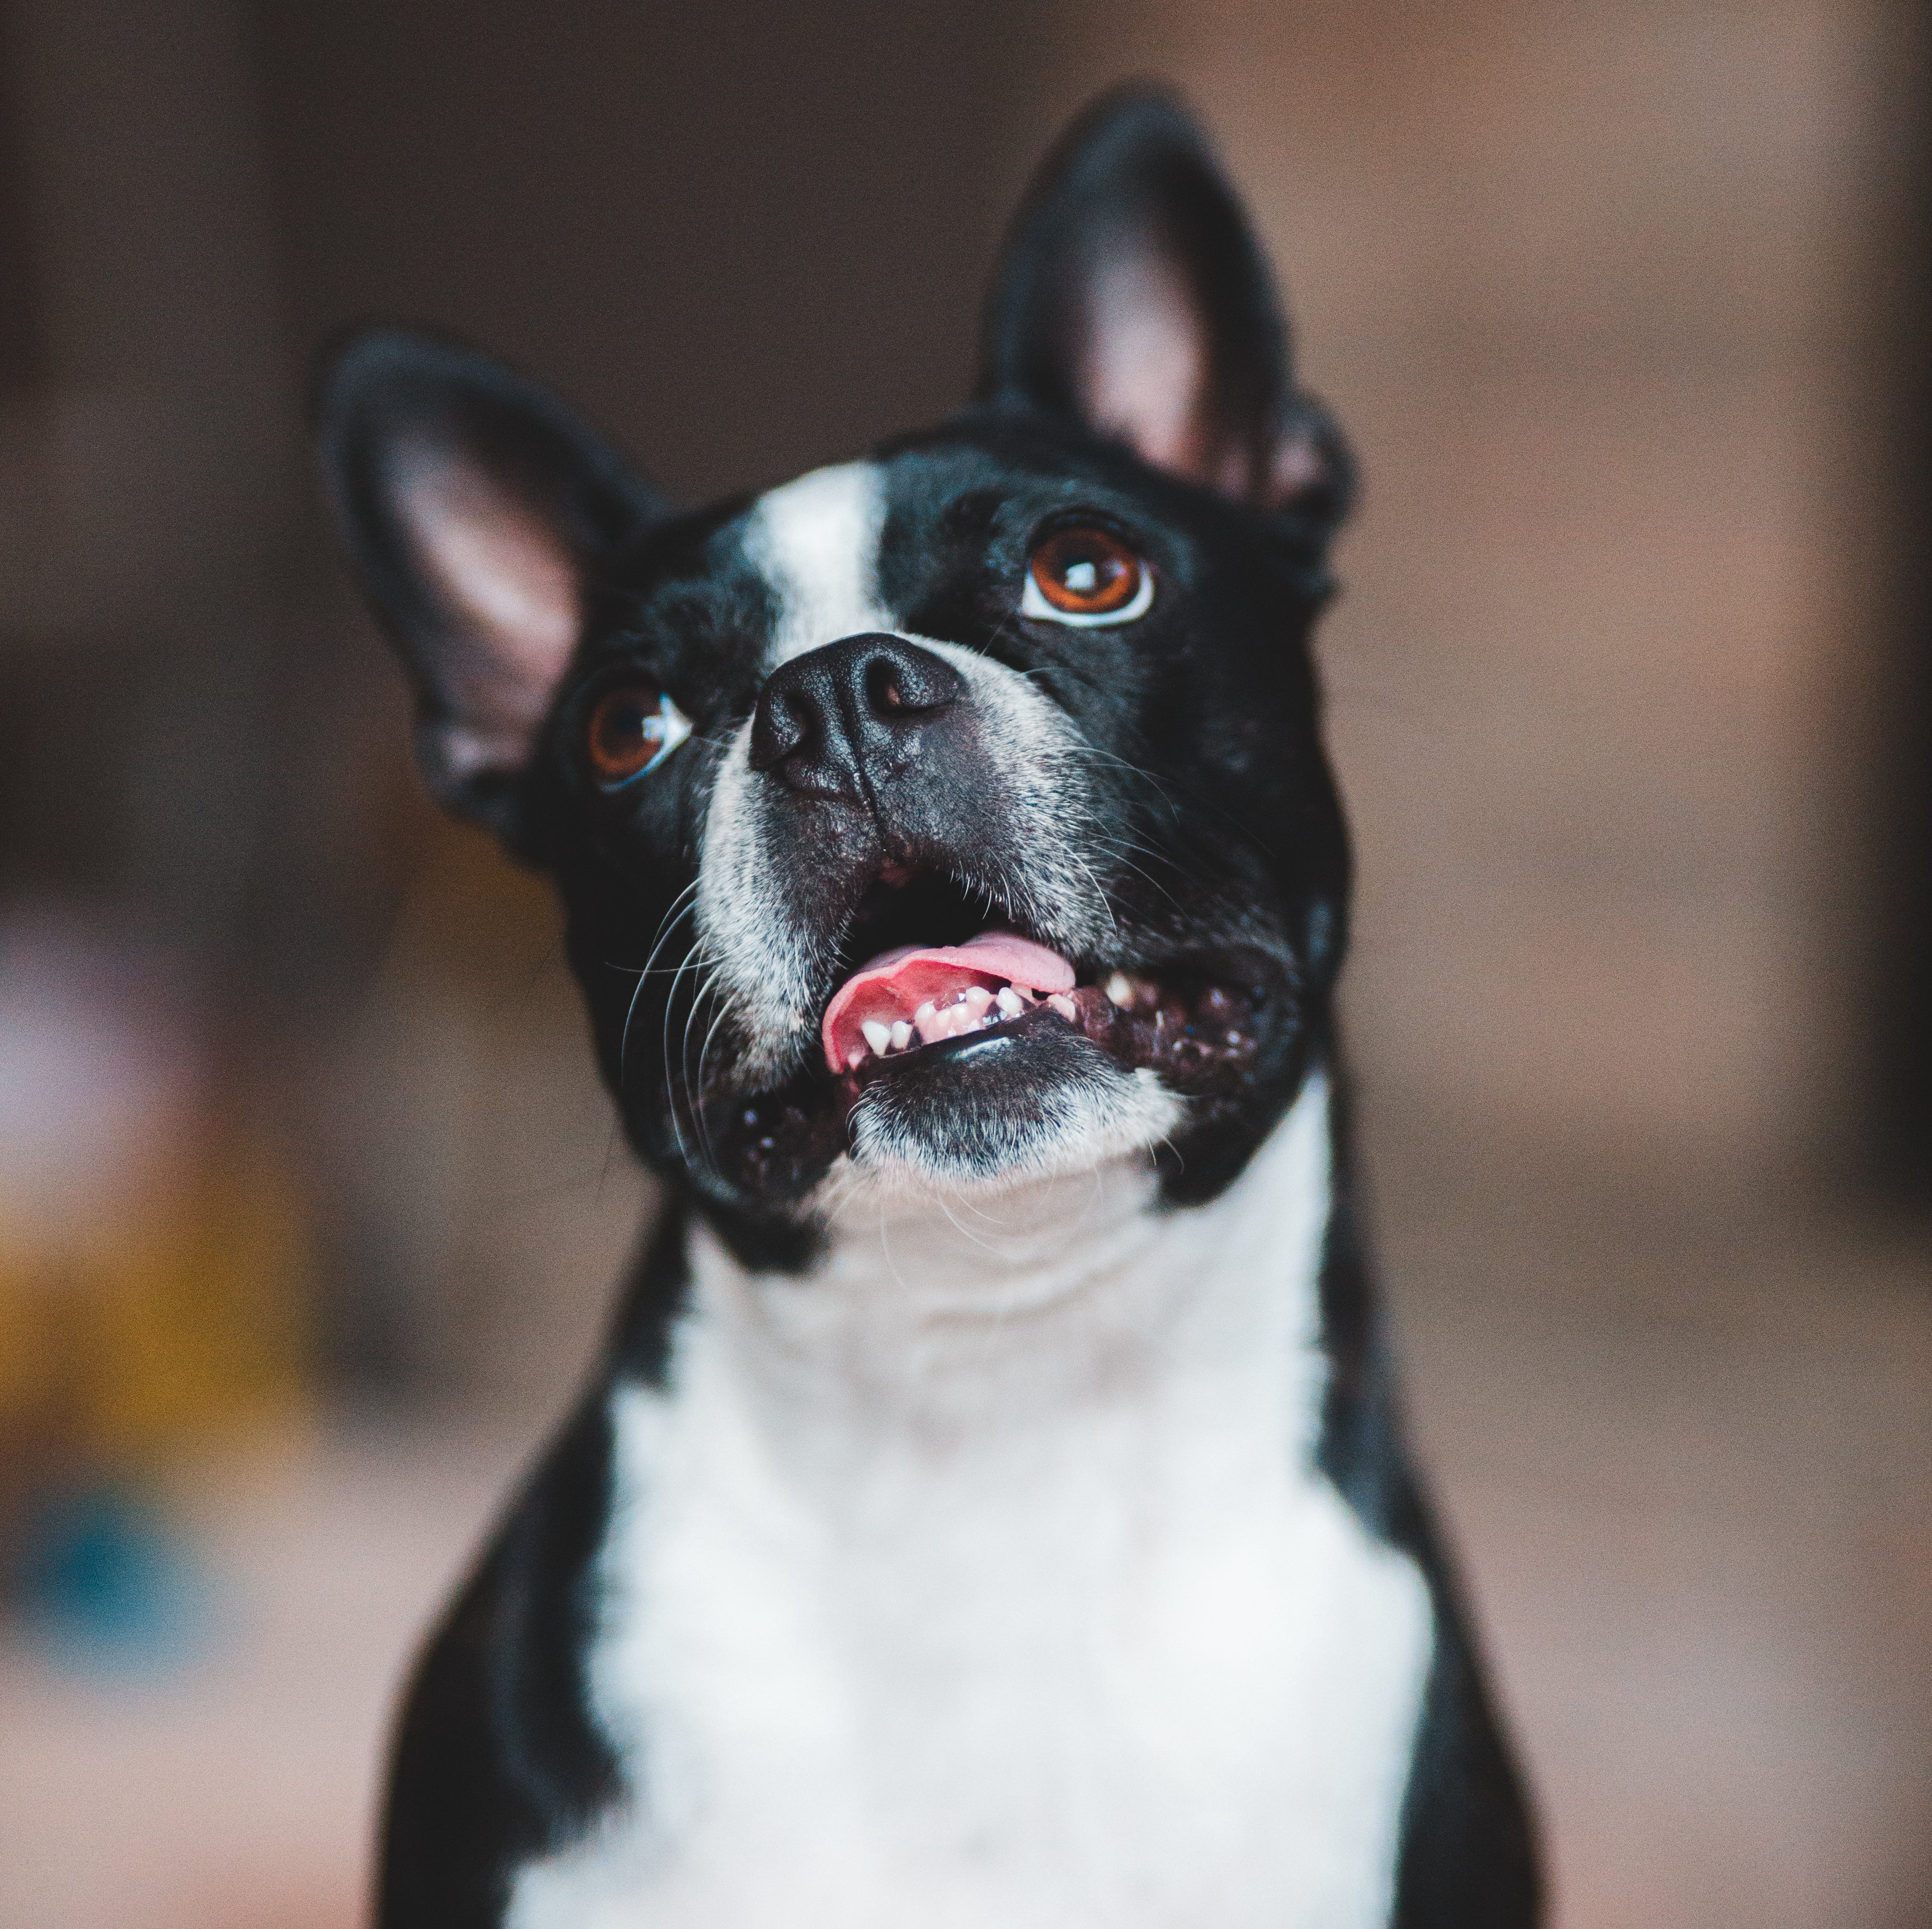 Unleash healthy smiles & happy tummies! CHESTER's dog treats: charcoal for whiter teeth, fresh breath & detox. Healthy, affordable, human-grade, all ages. Treat your pup!